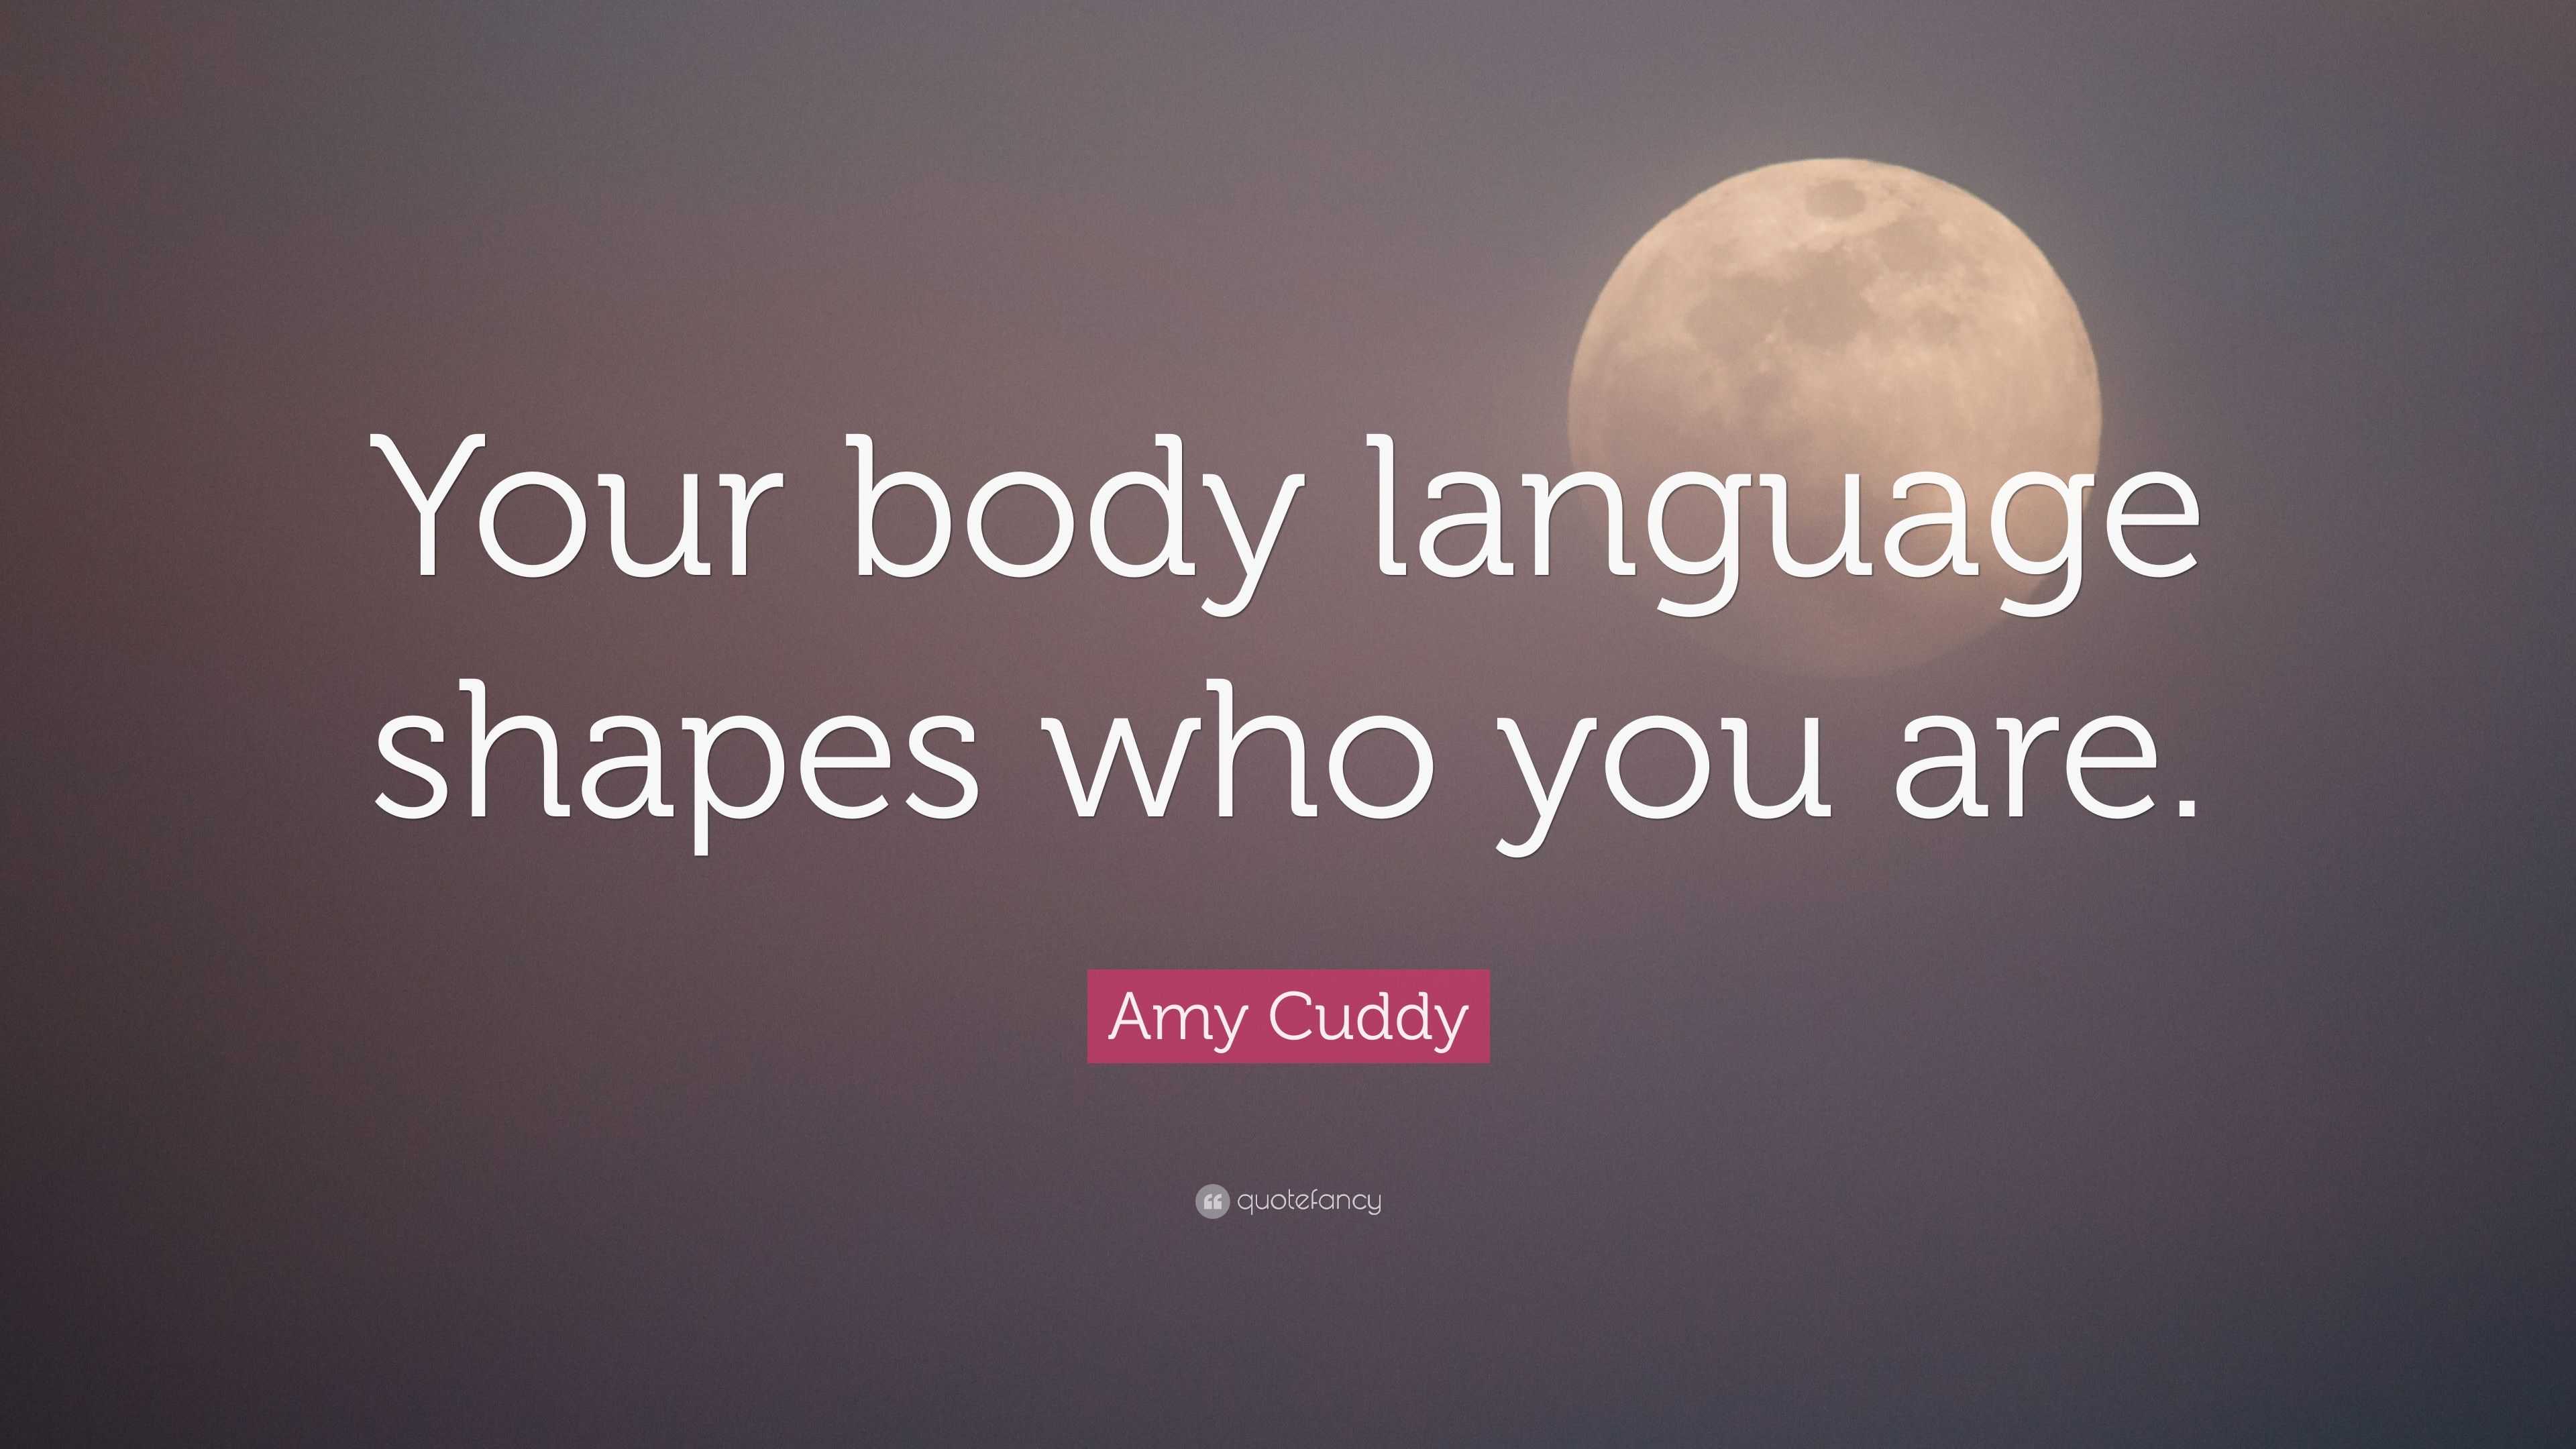 The Your Body Language Shapes Who You